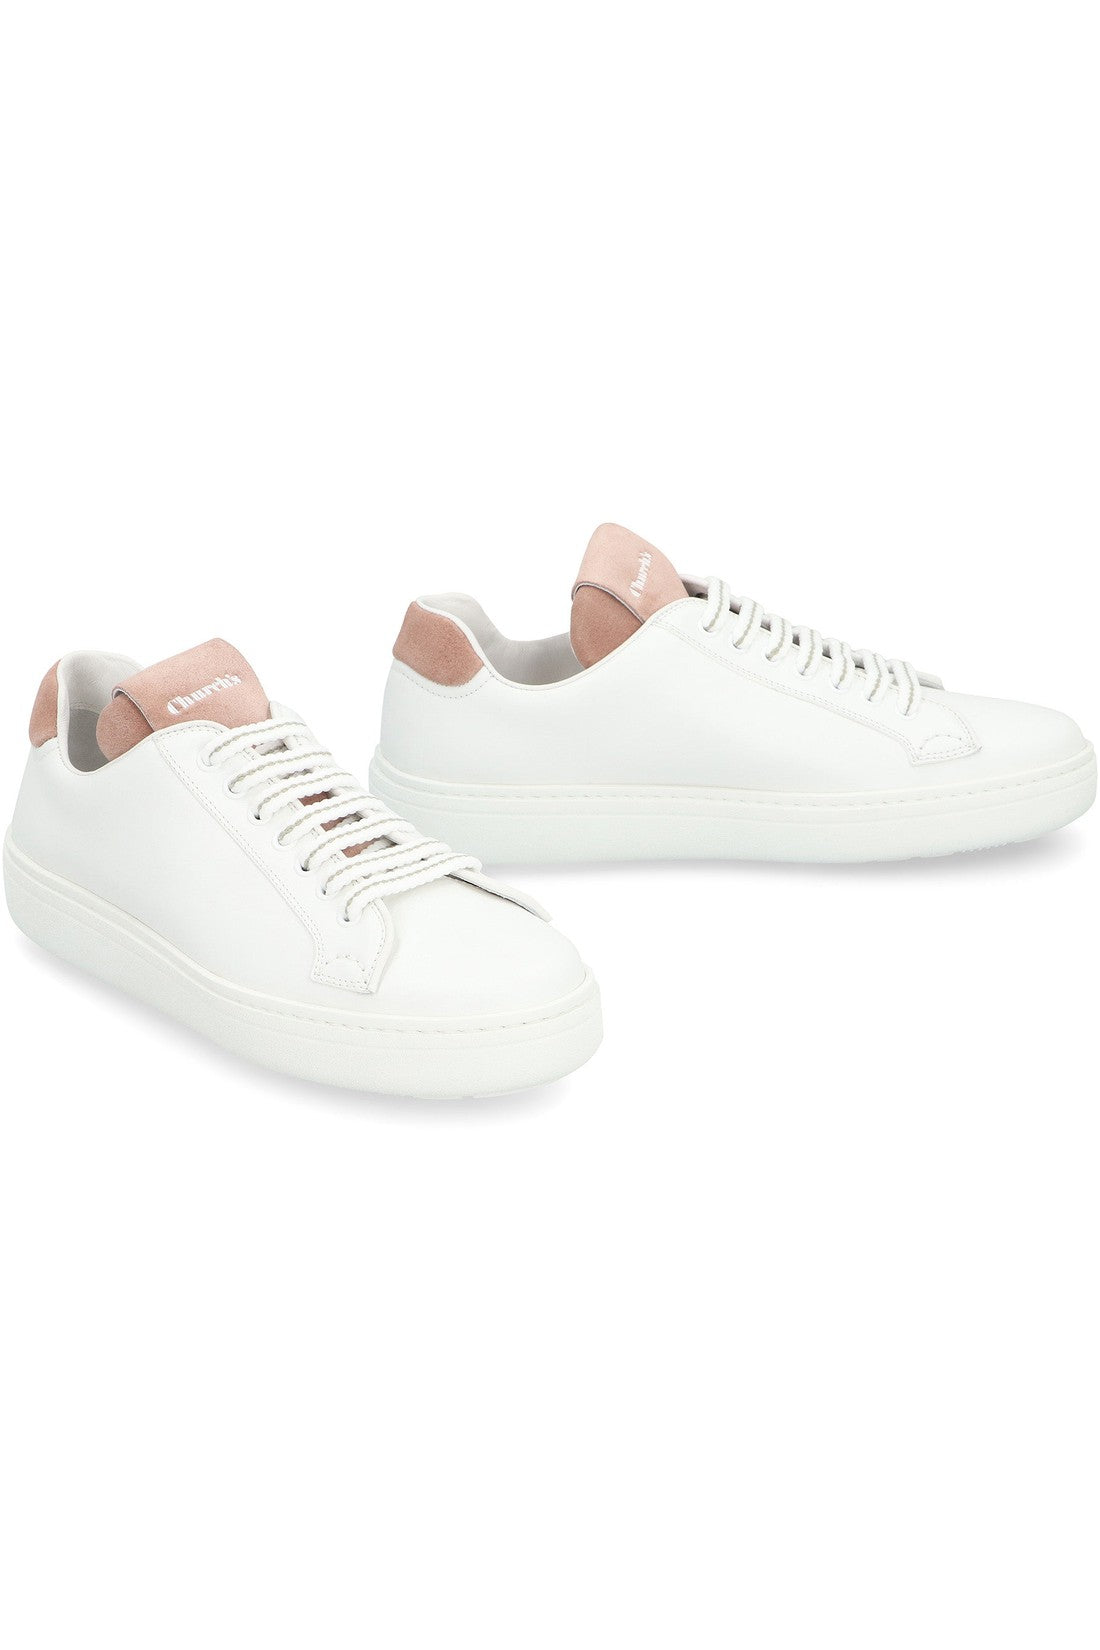 Church's-OUTLET-SALE-Bowland W leather low-top sneakers-ARCHIVIST